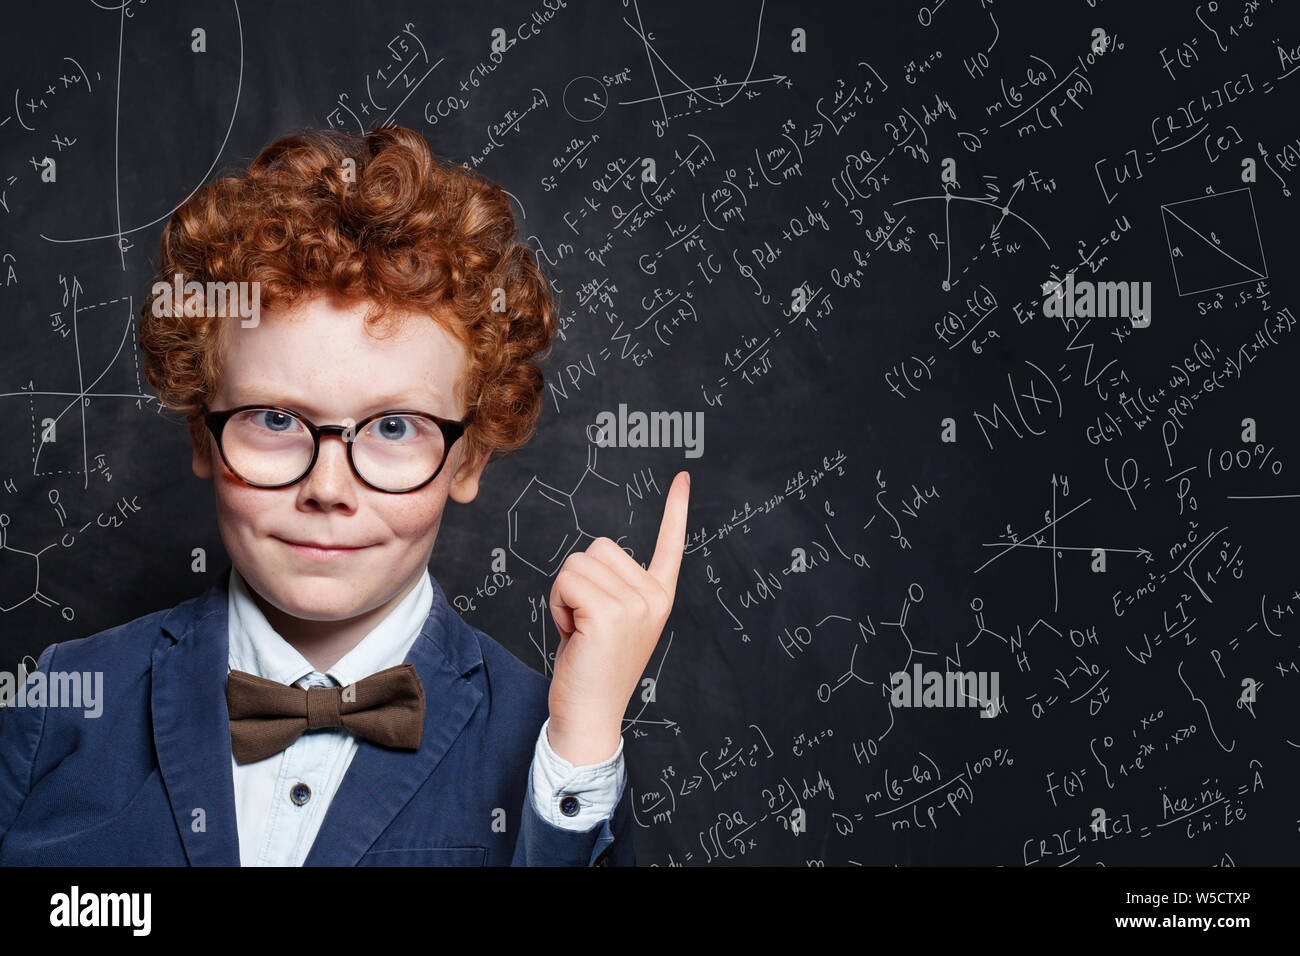 Happy kid student pointing up on science background Stock Photo